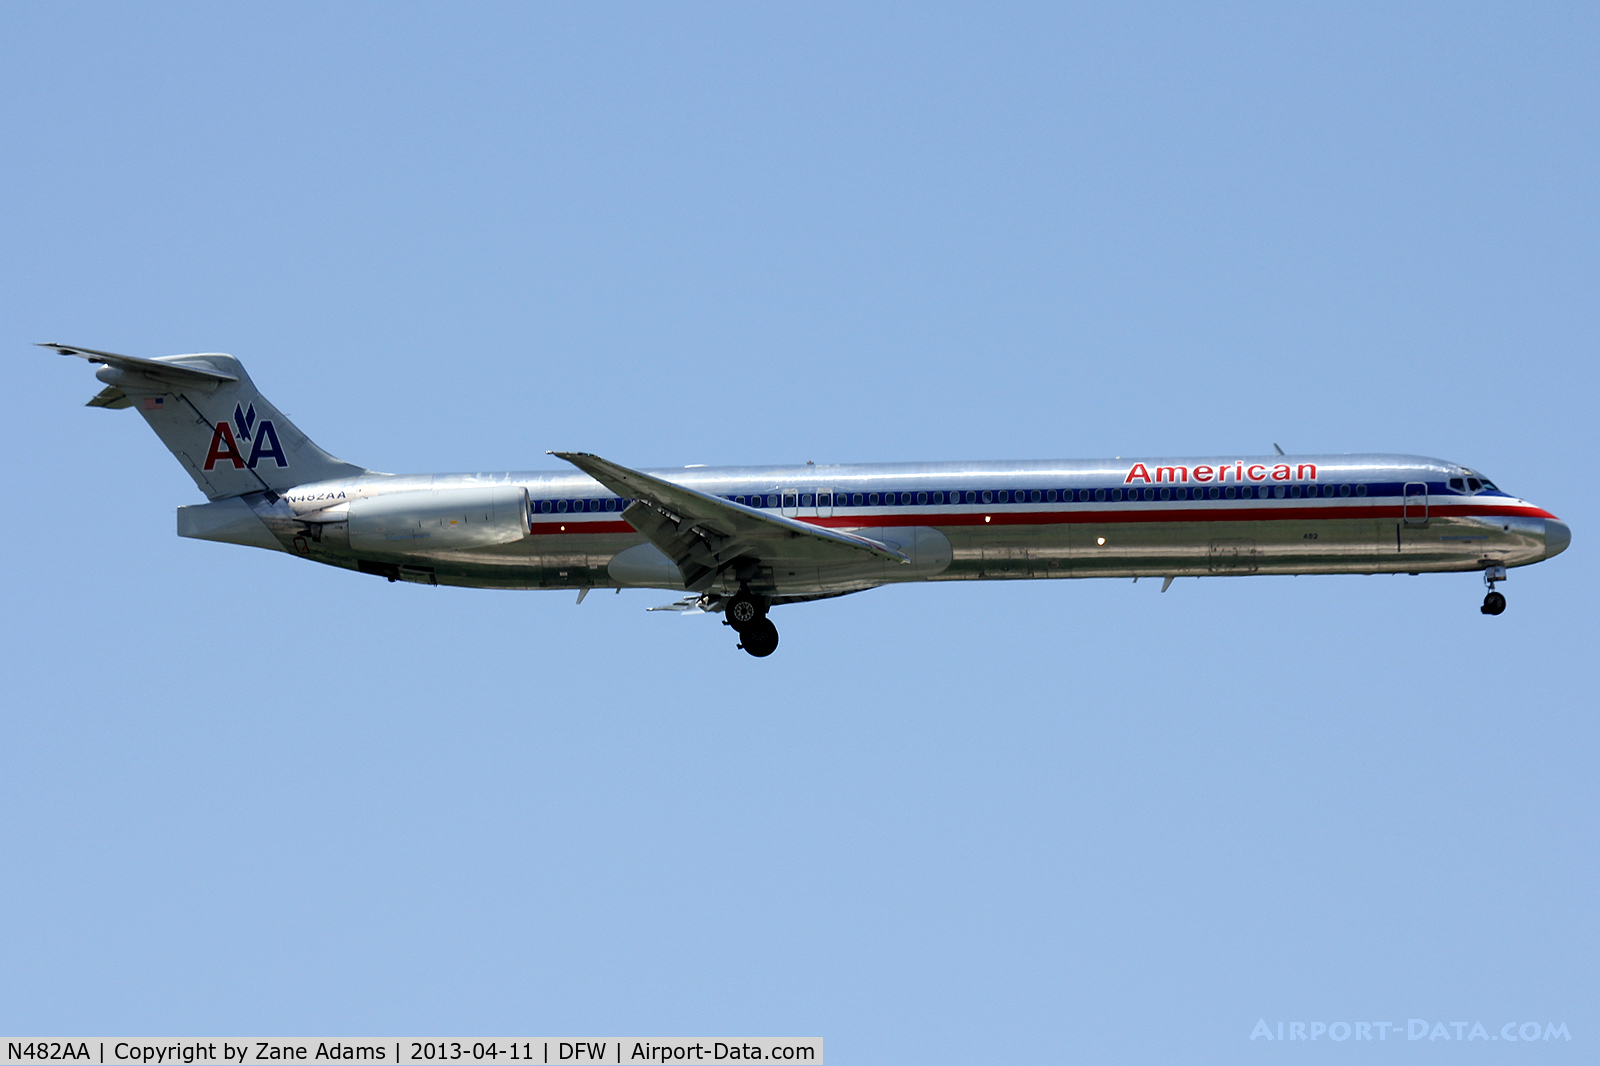 N482AA, 1988 McDonnell Douglas MD-82 (DC-9-82) C/N 49675, Landing at DFW Airport